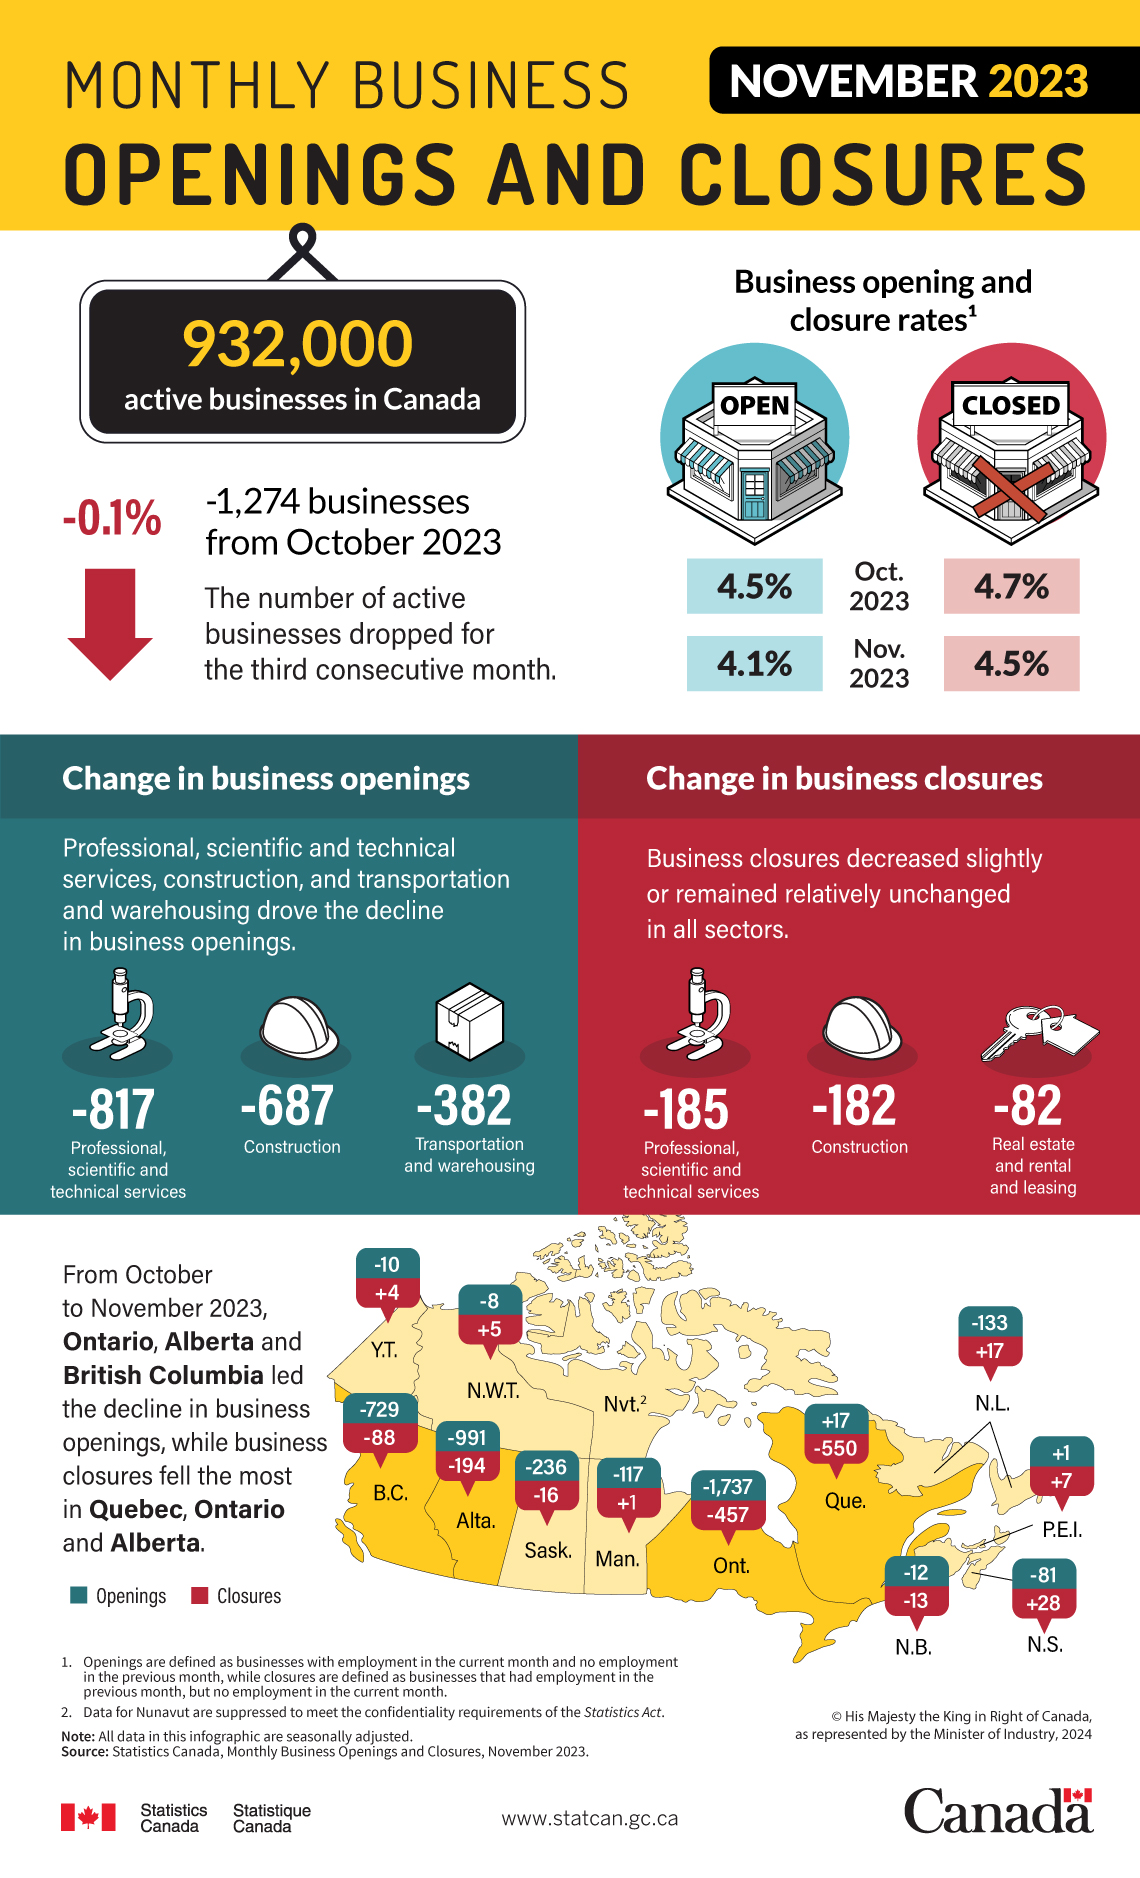 Monthly business openings and closures, November 2023